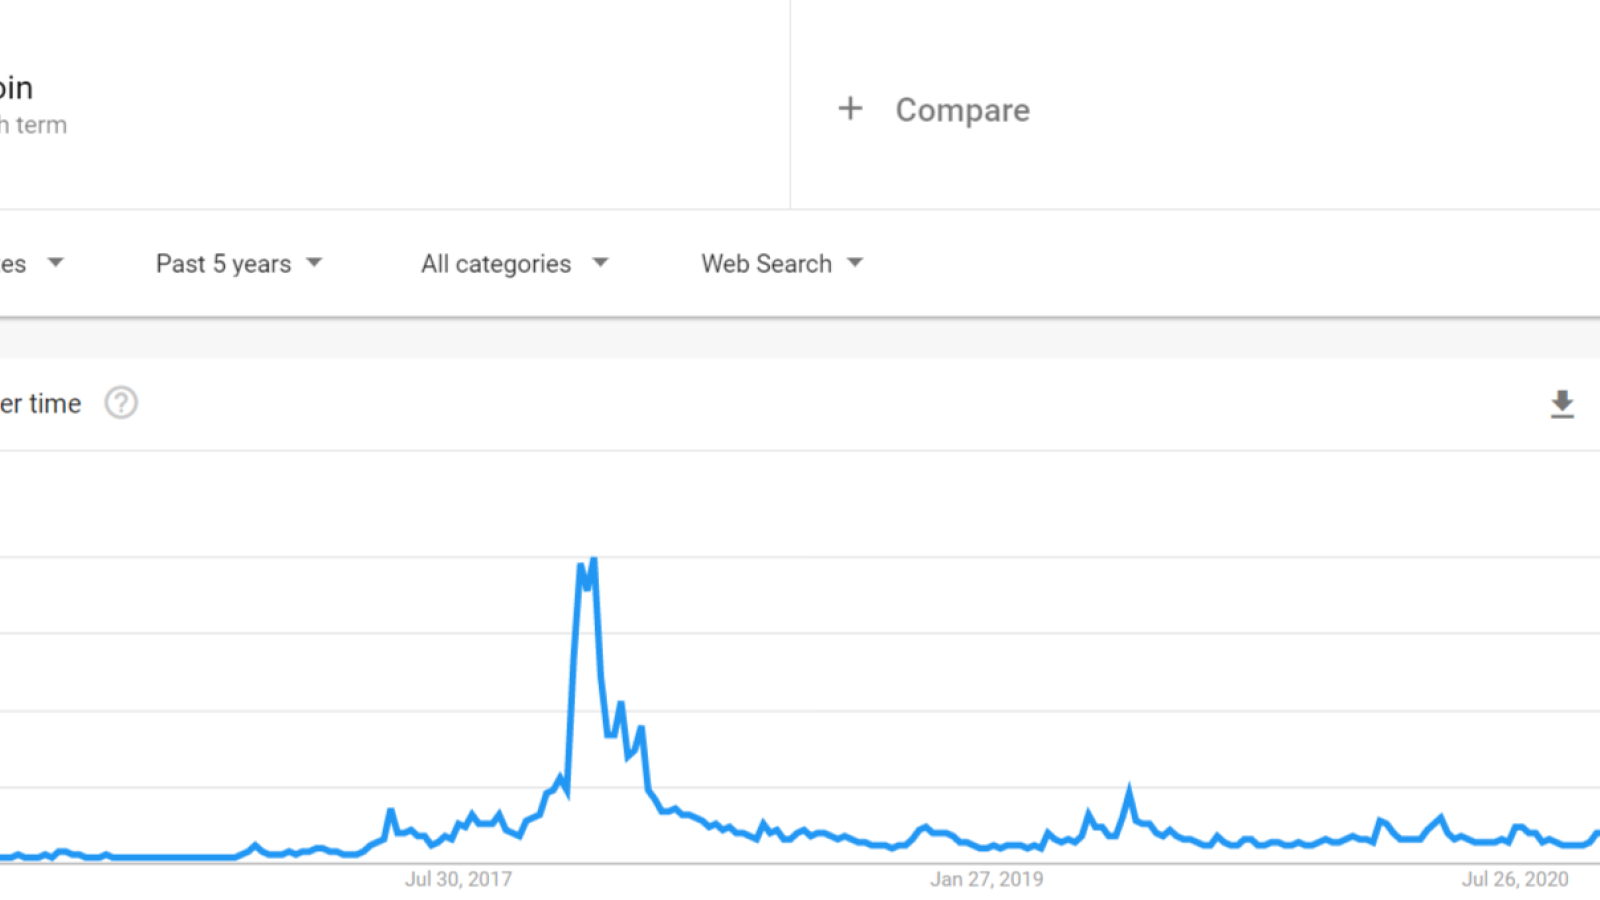 Google Trends: interest in Bitcoin remains low